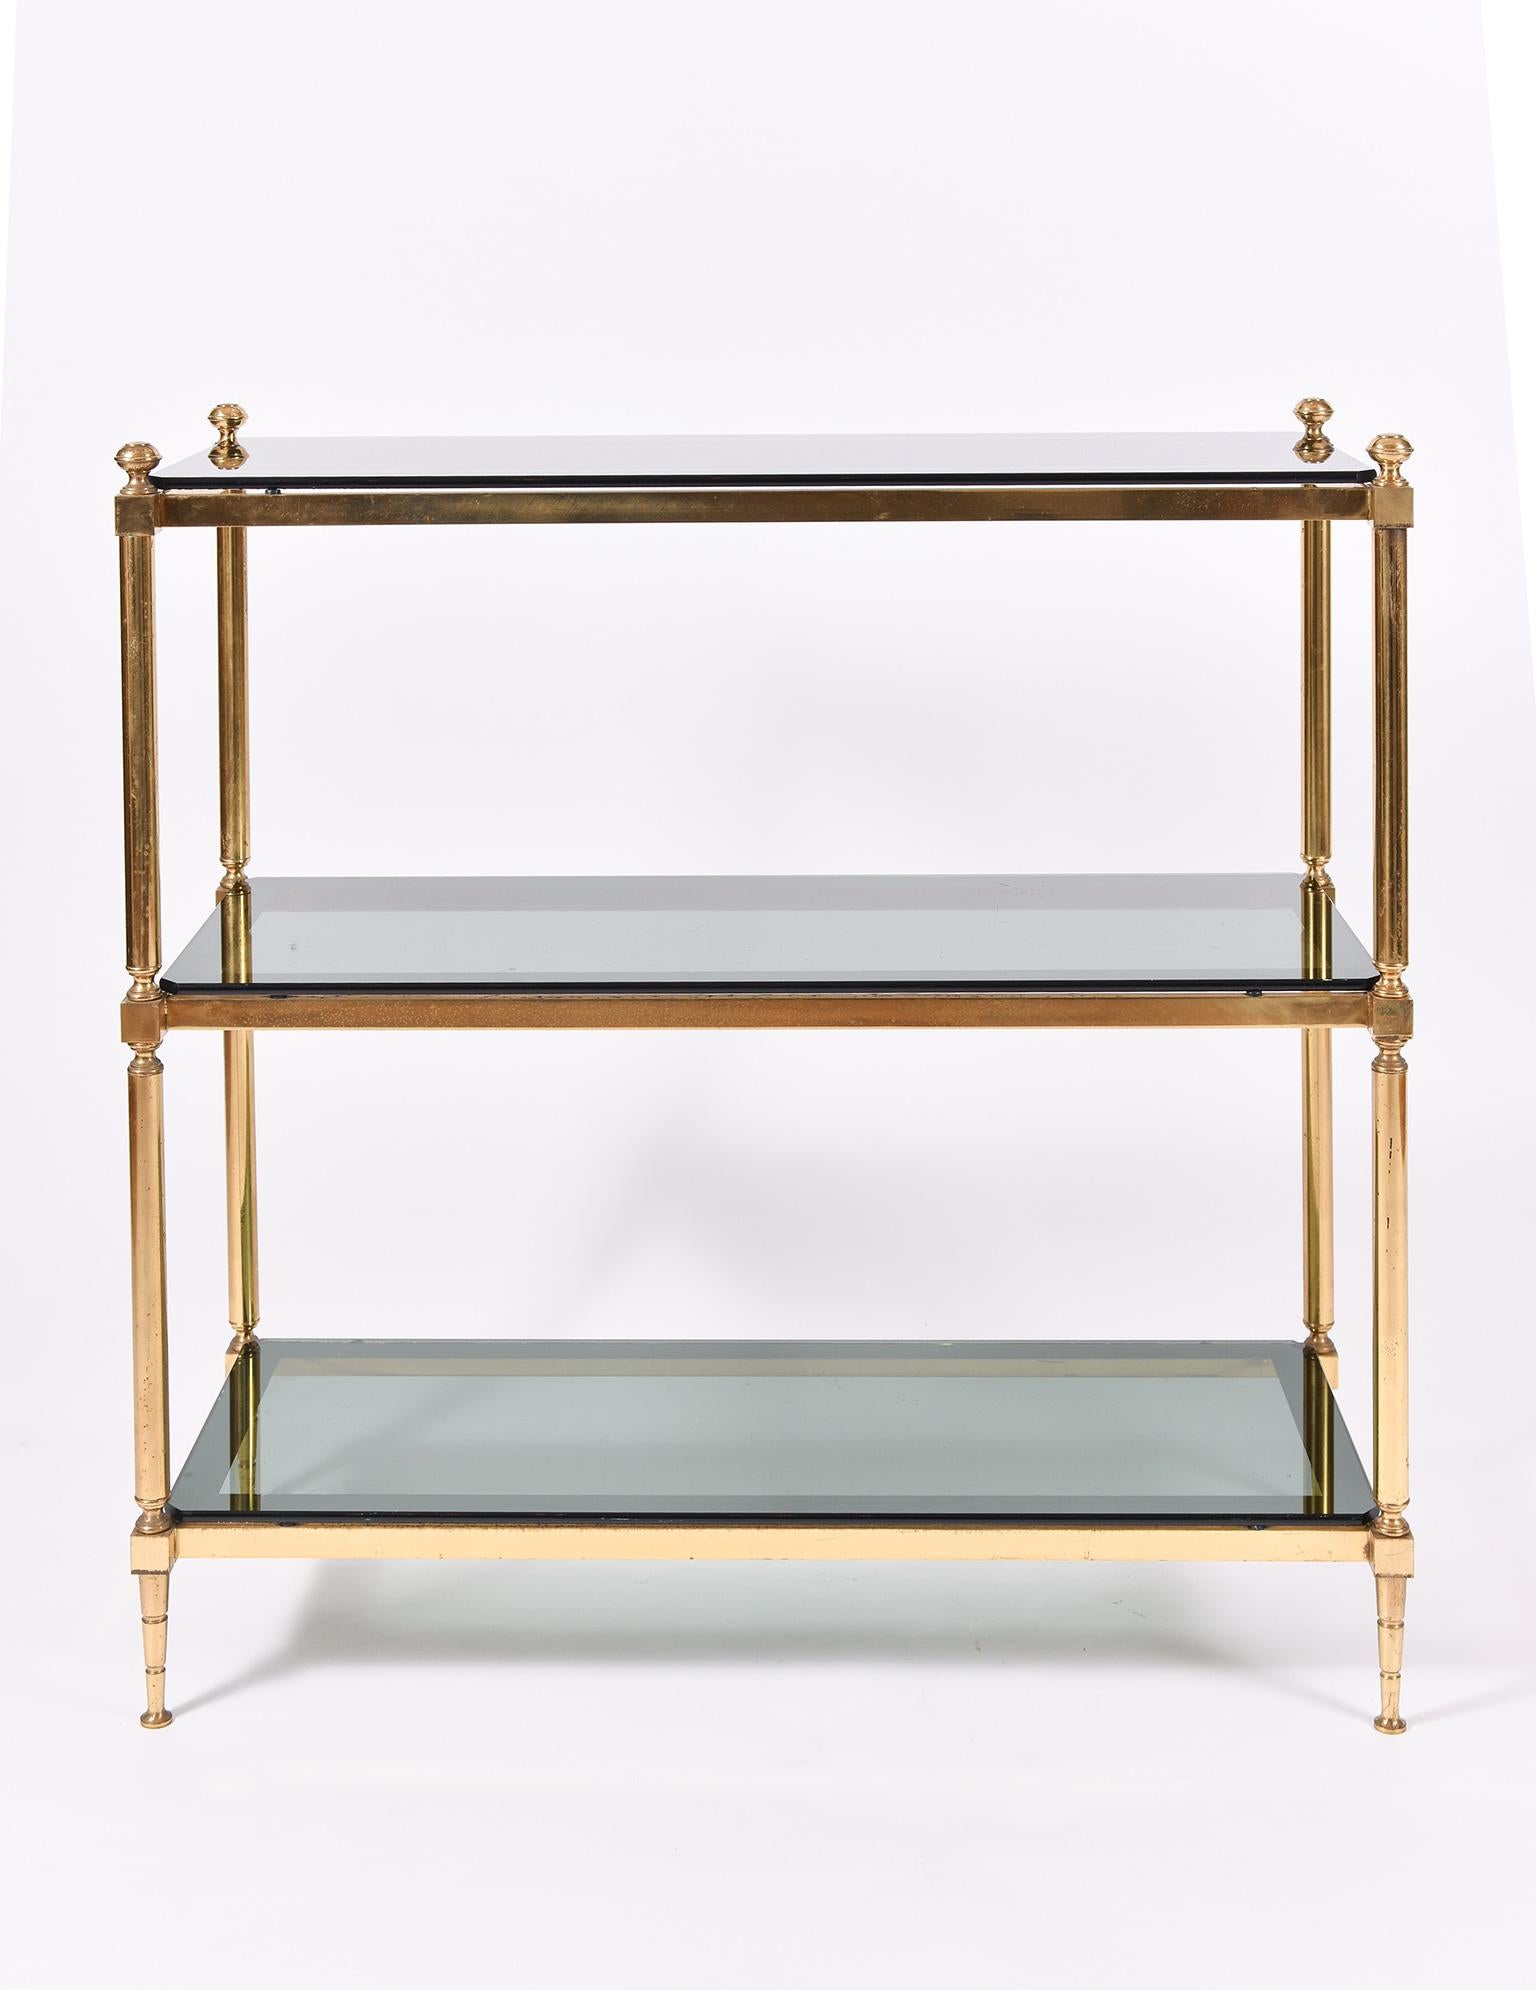 A brass and smoked glass top three-tiered console table
Sweden, circa 1950.